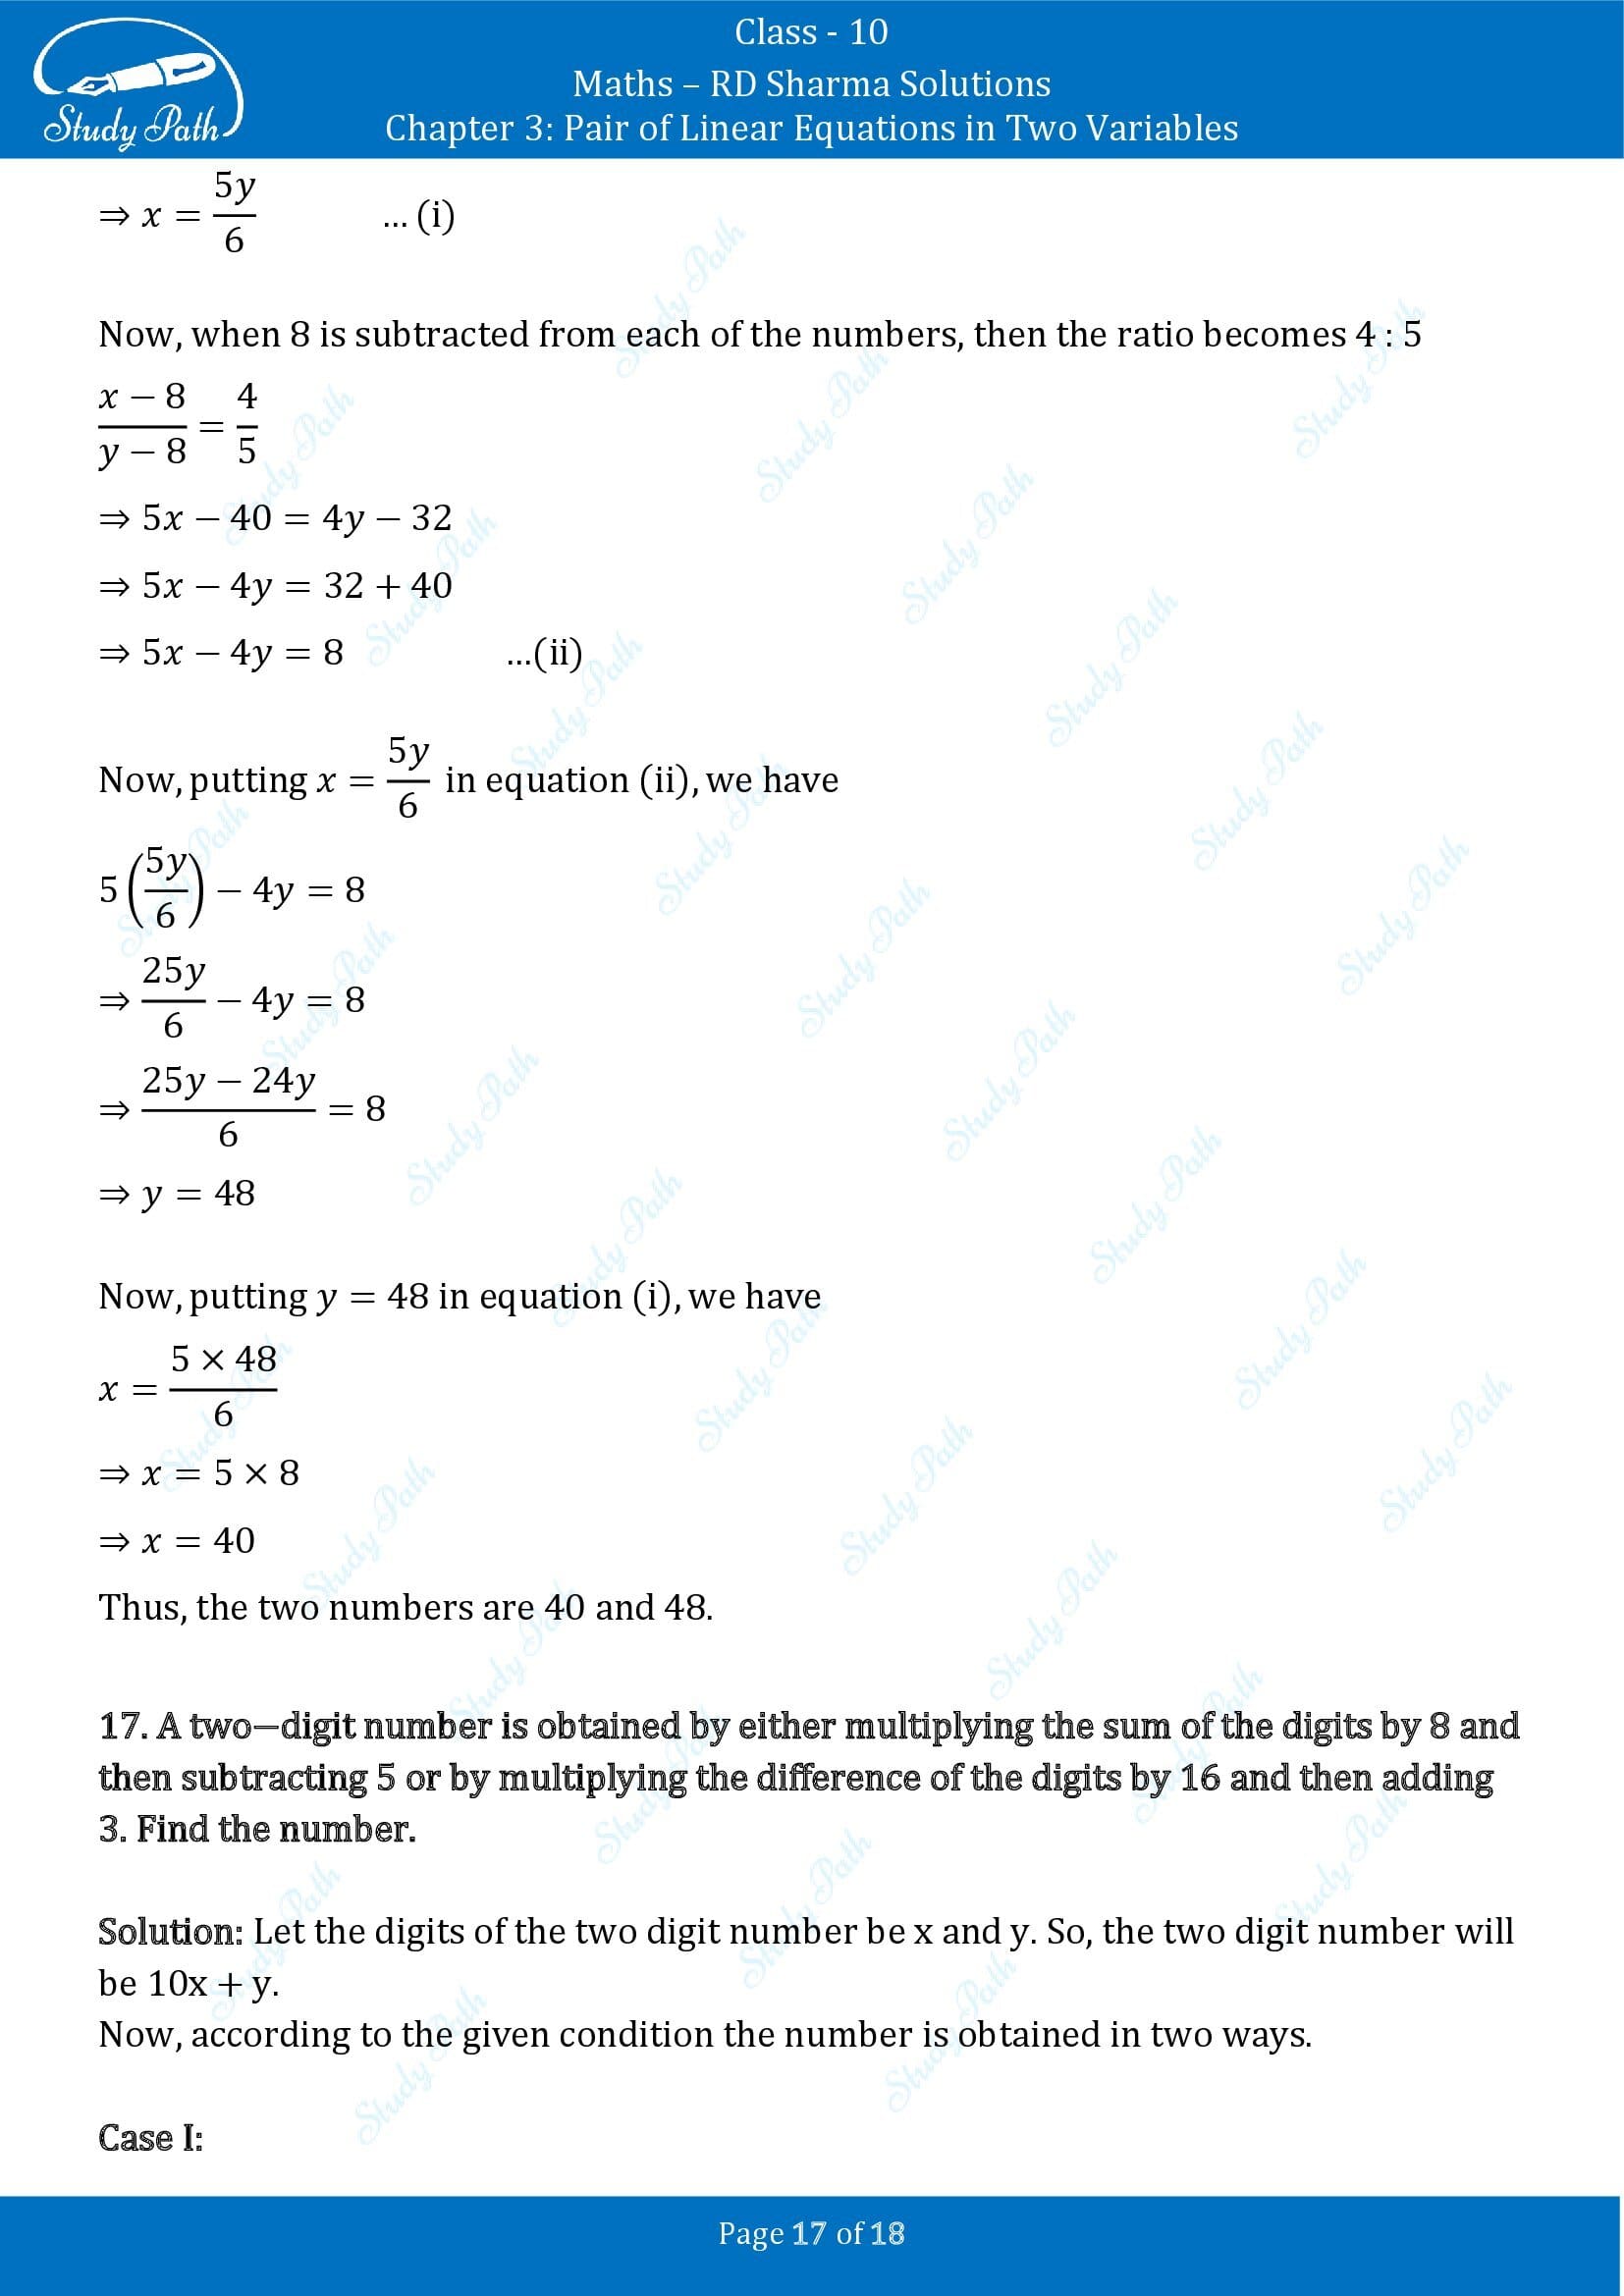 RD Sharma Solutions Class 10 Chapter 3 Pair of Linear Equations in Two Variables Exercise 3.7 00017